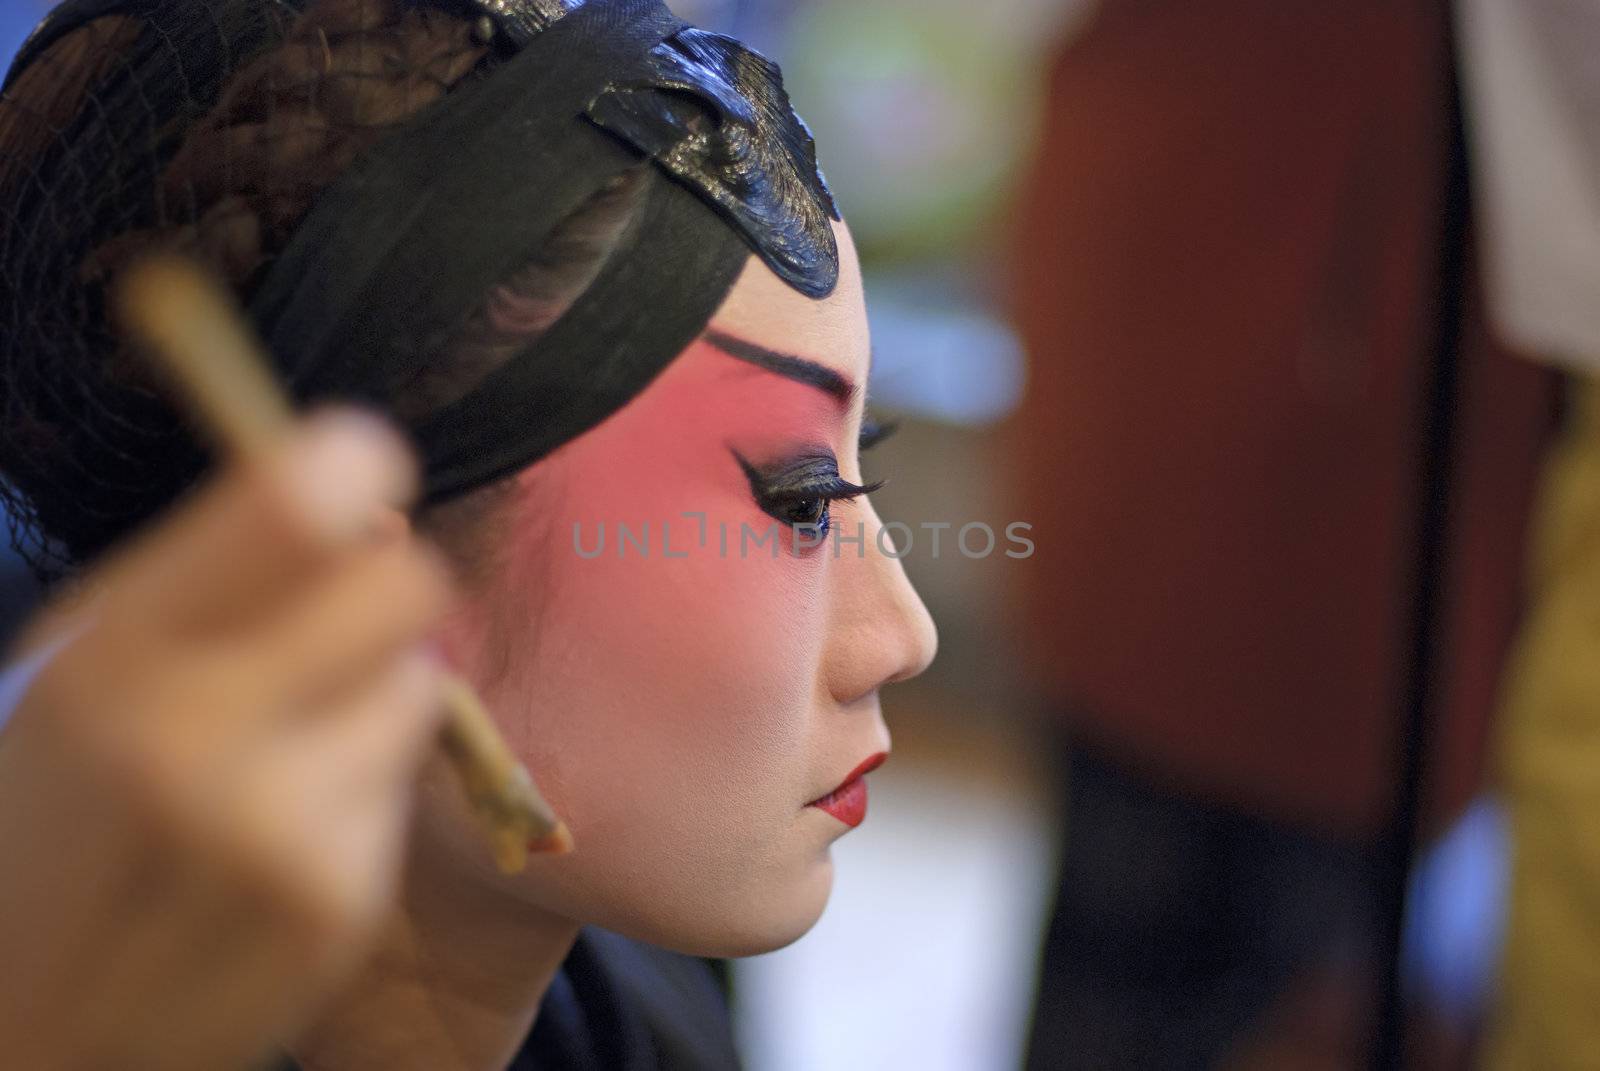 CHENGDU - Dec 15: a chinese opera actress is painting her face at backstage at JingJiang theater on Dec 15,2007 in Chengdu; China.